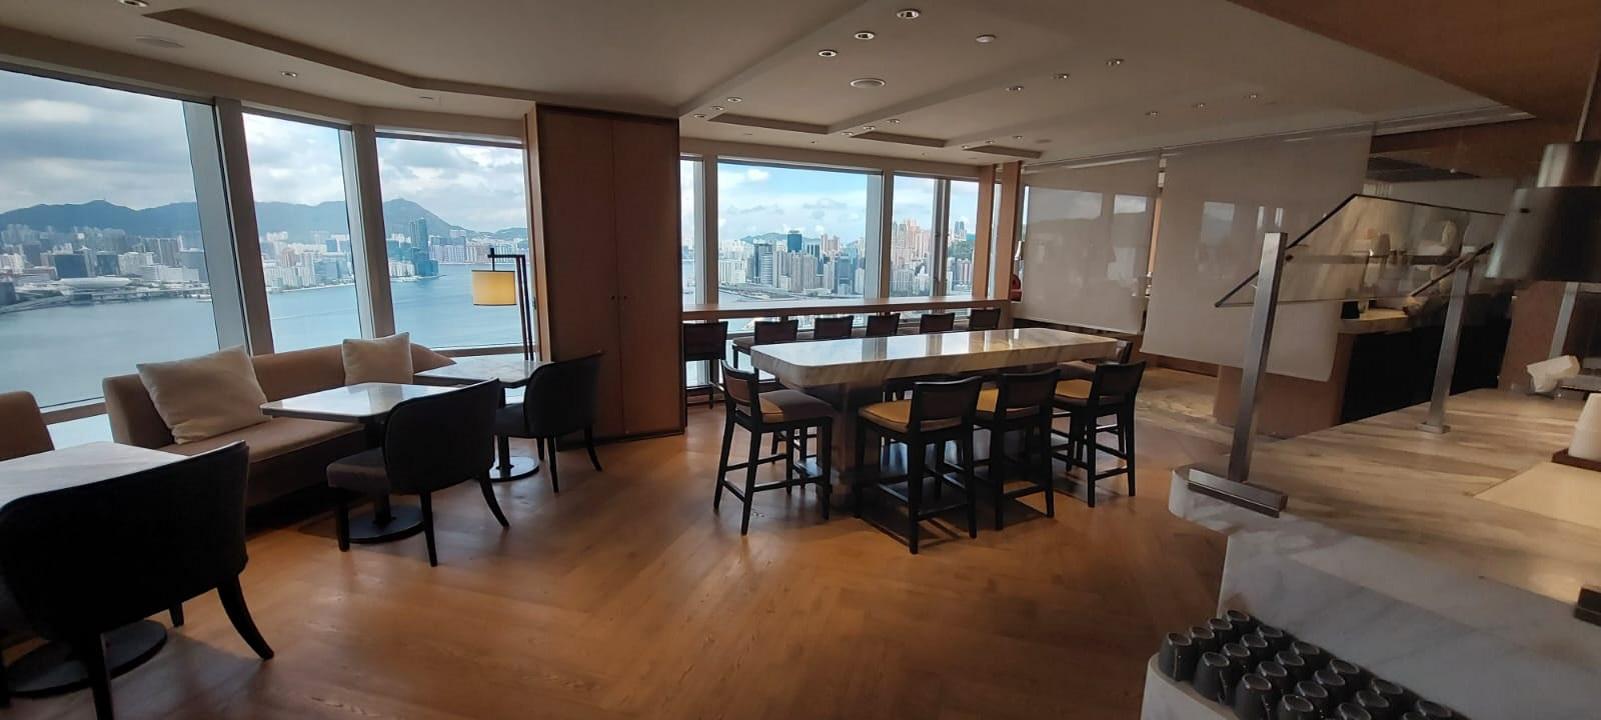 Renaissance Hong Kong Harbour View Hotel Executive Club Lounge Table Seating